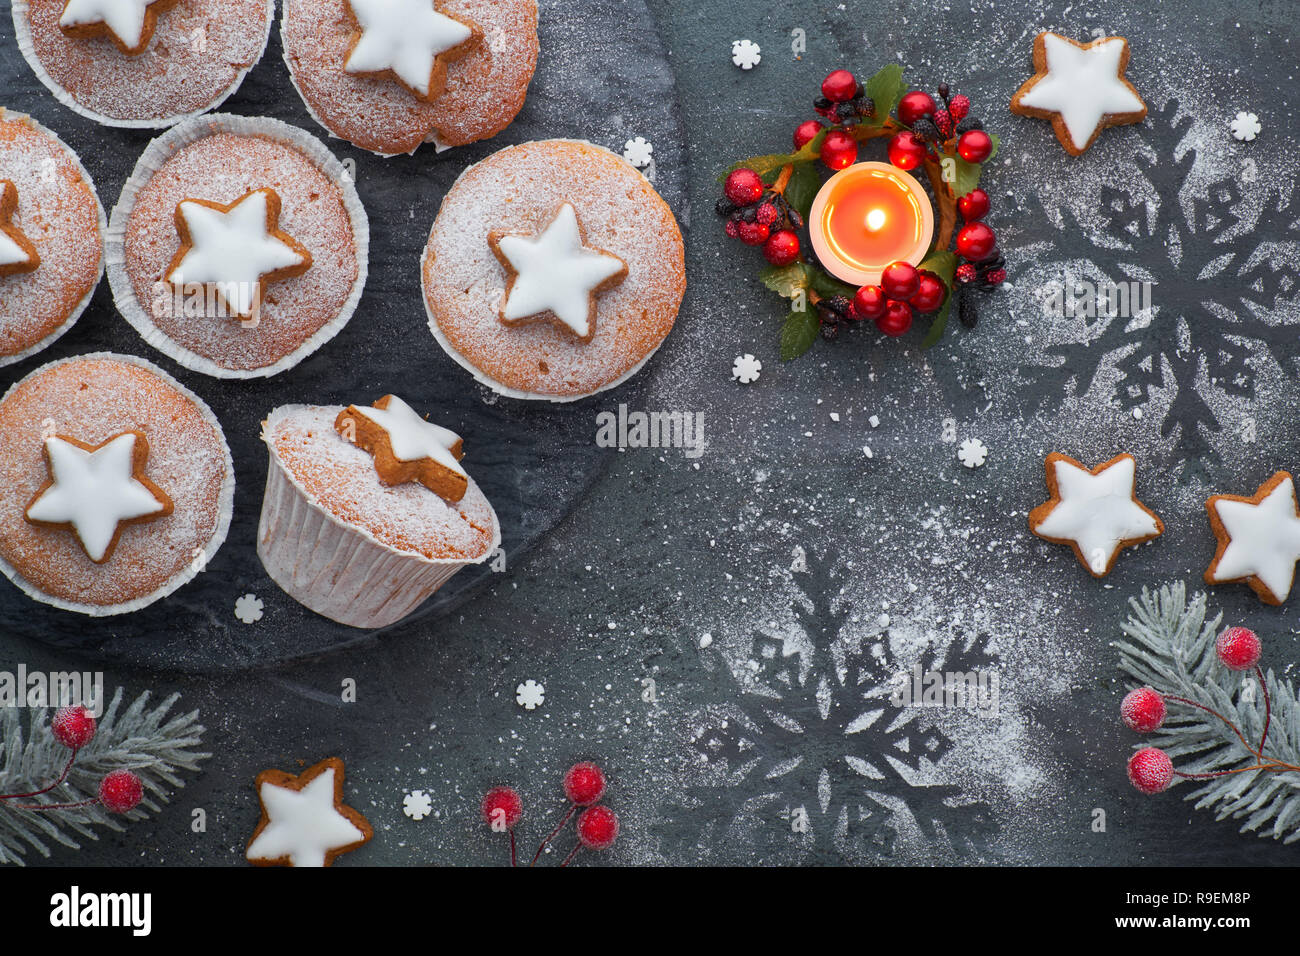 Top view of the wooden board  with sugar-sprinkled muffins, fondant icing and Christmas star cookies on dark background with candle Stock Photo